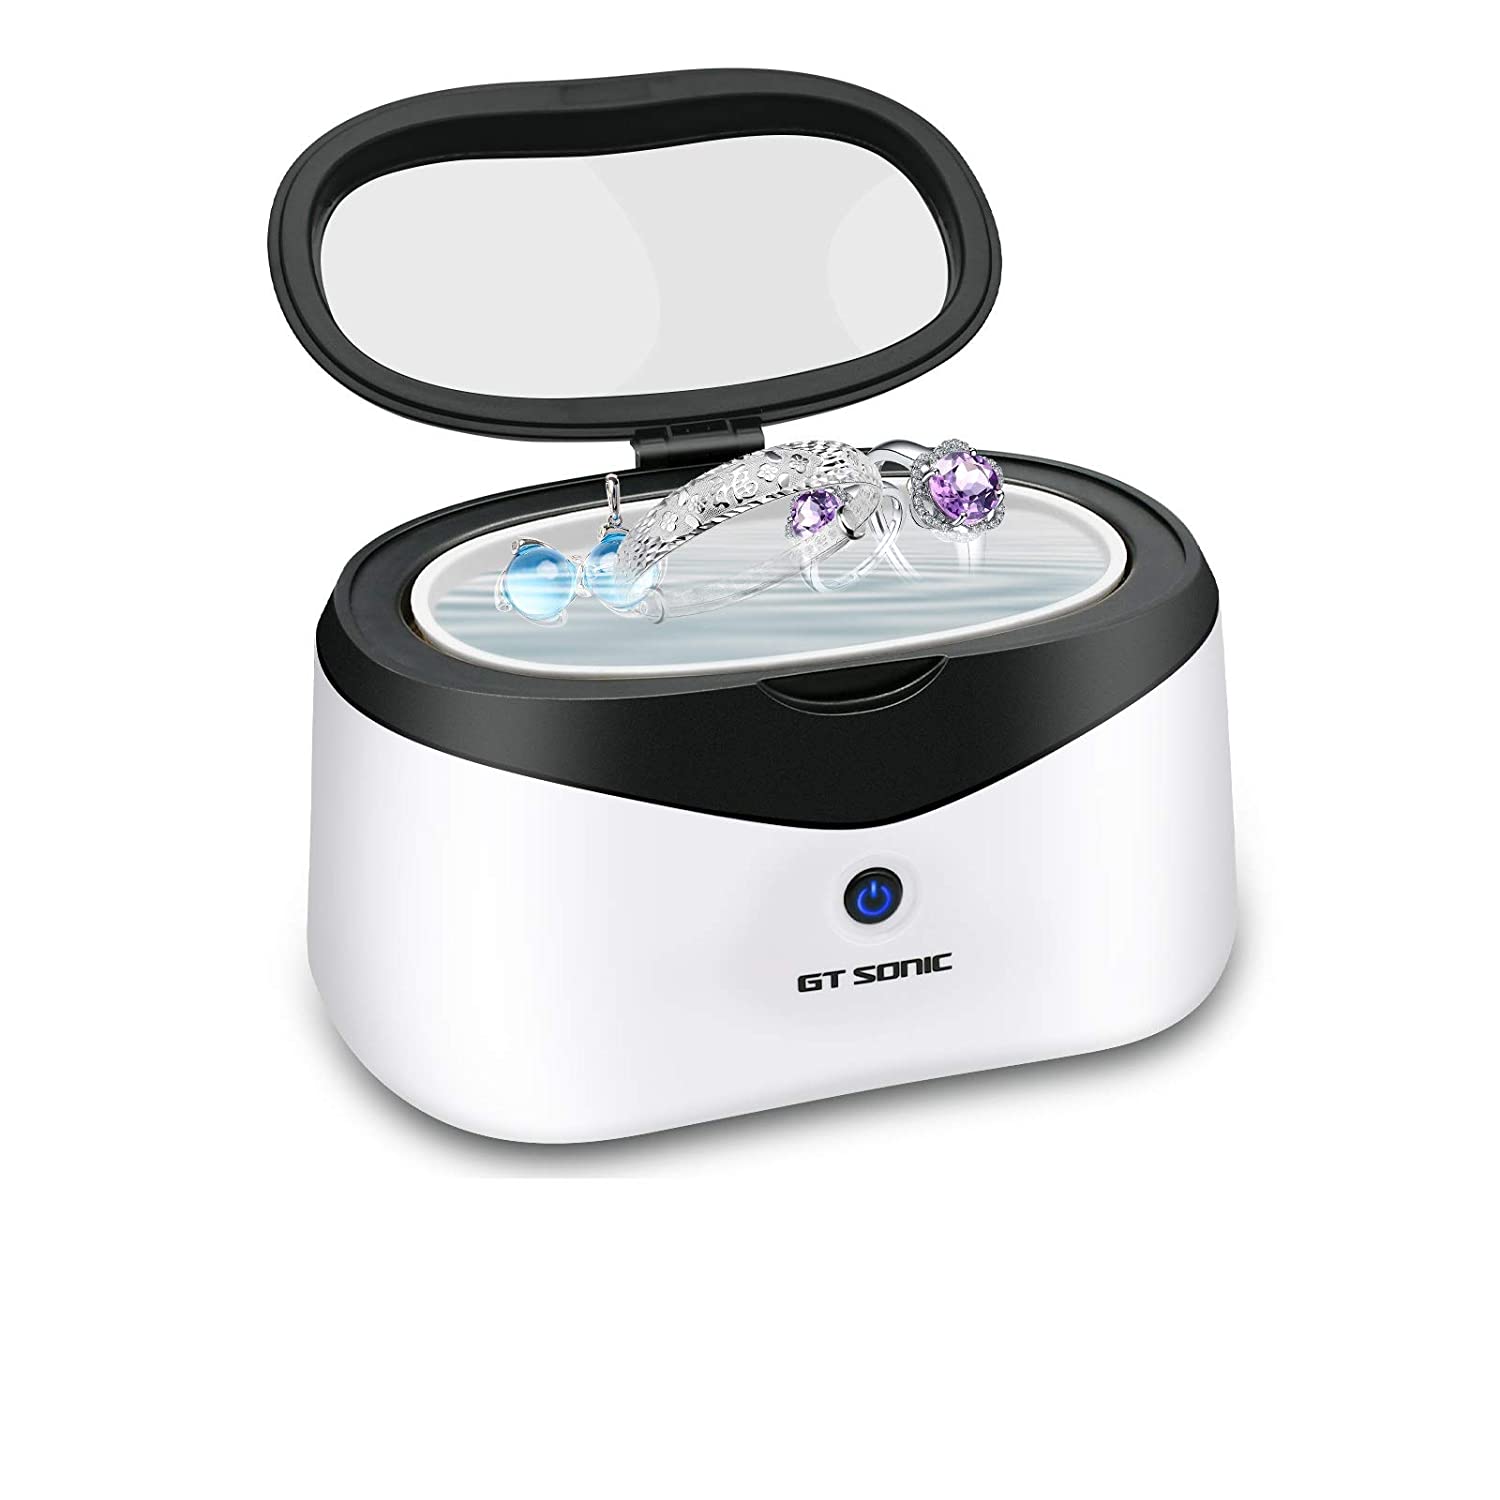 Jewelry-Cleaner Top 10 Gift Ideas for Women Over 50